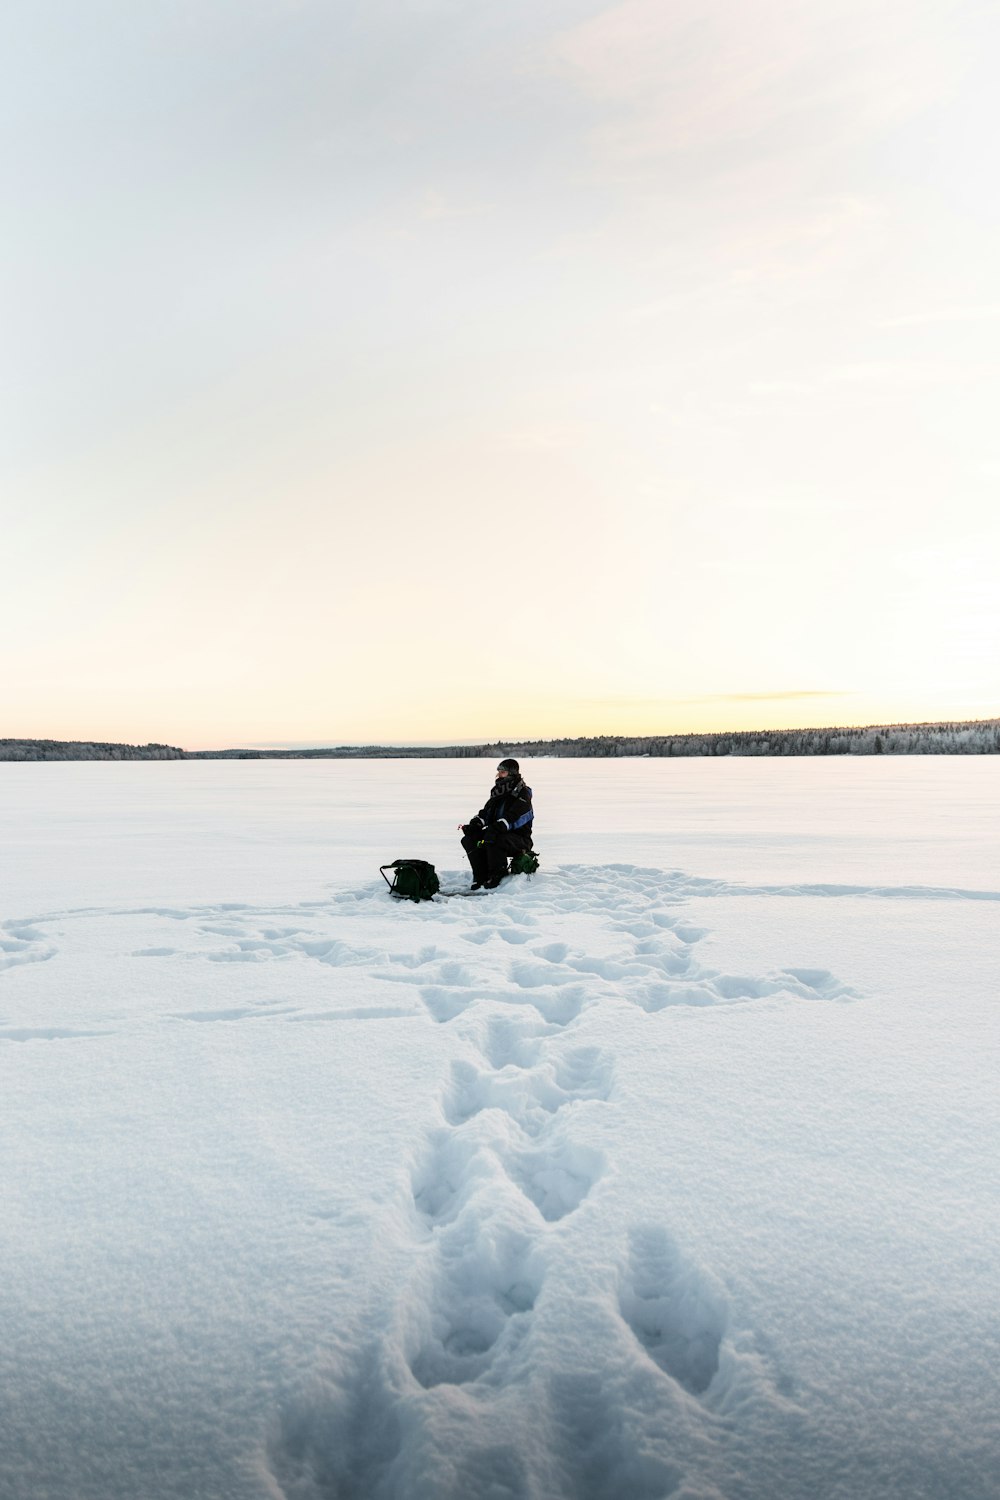 a person sitting in the middle of a snowy field